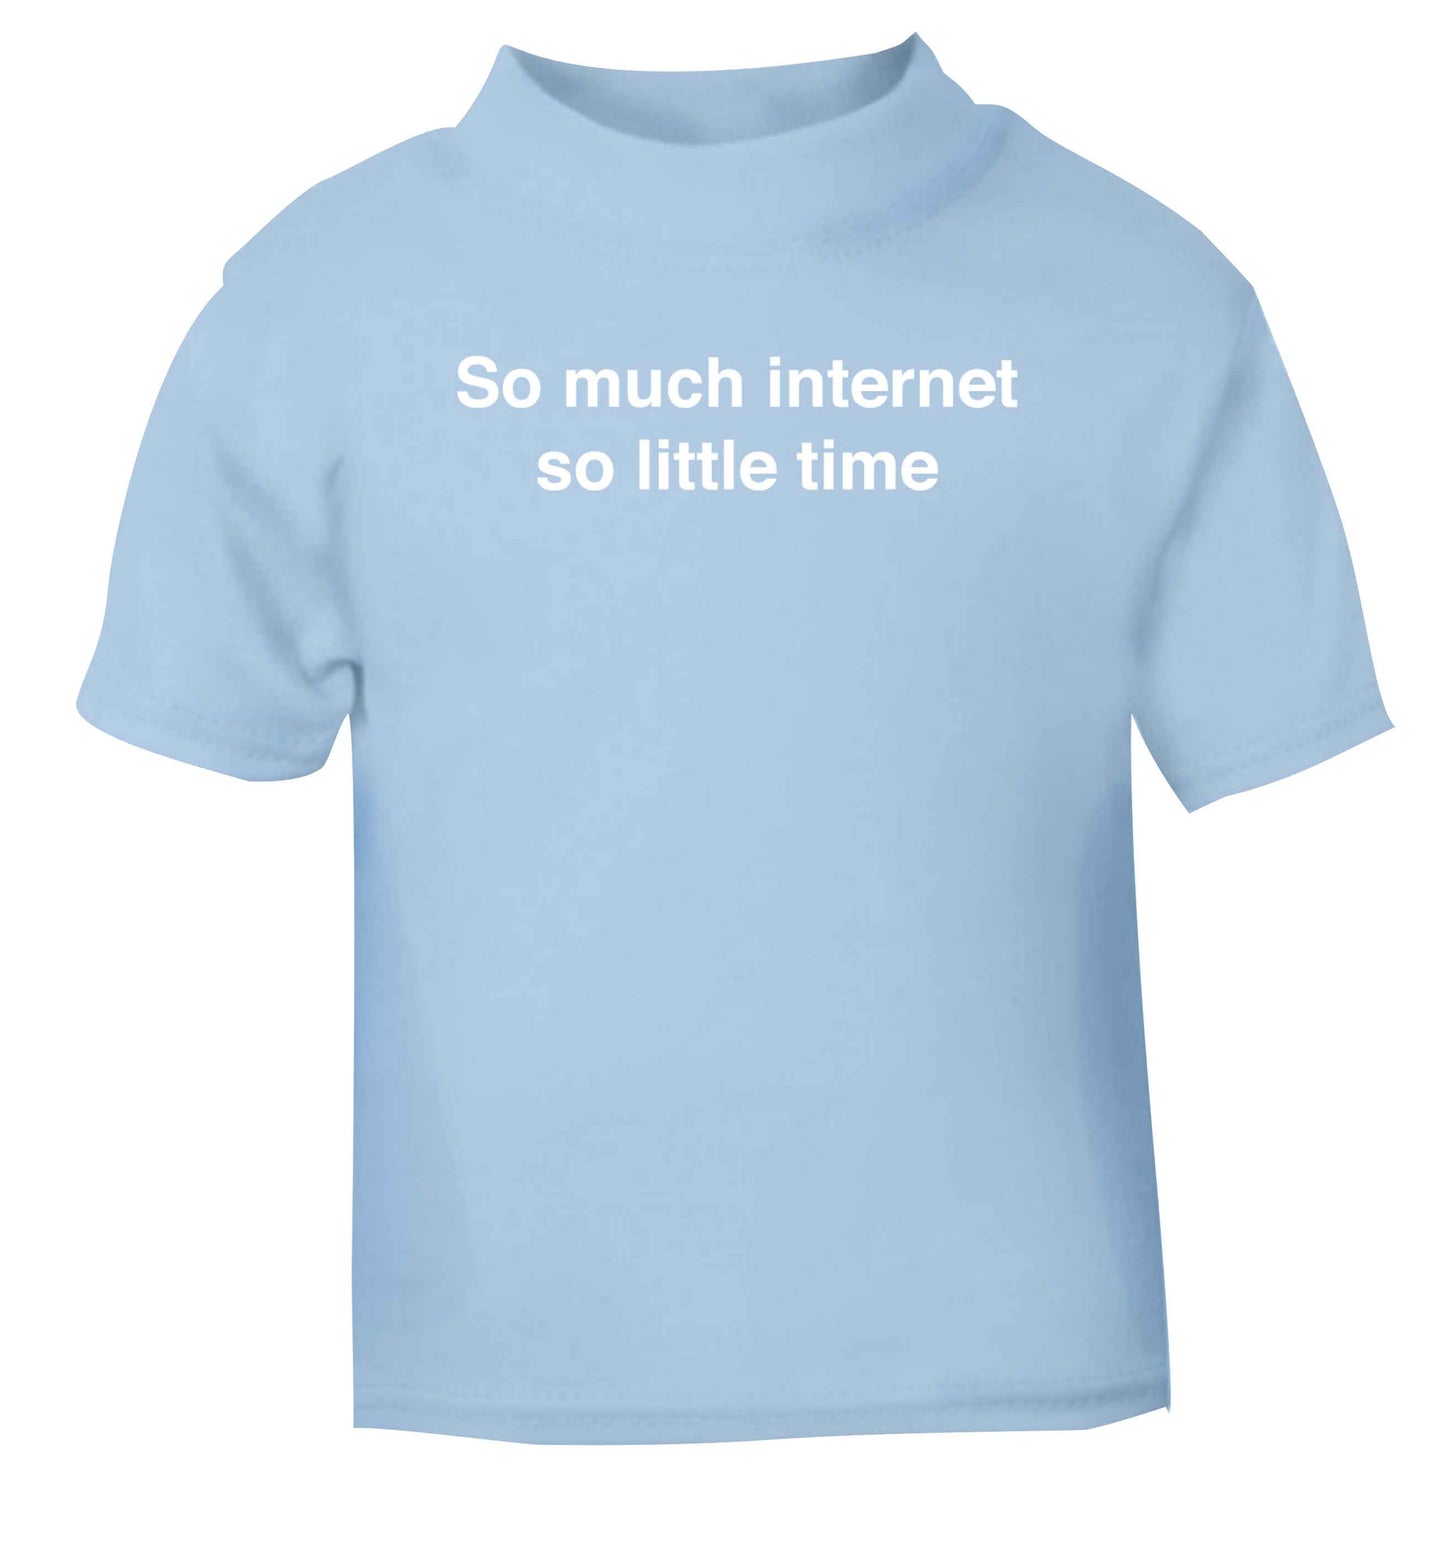 So much internet so little time light blue baby toddler Tshirt 2 Years